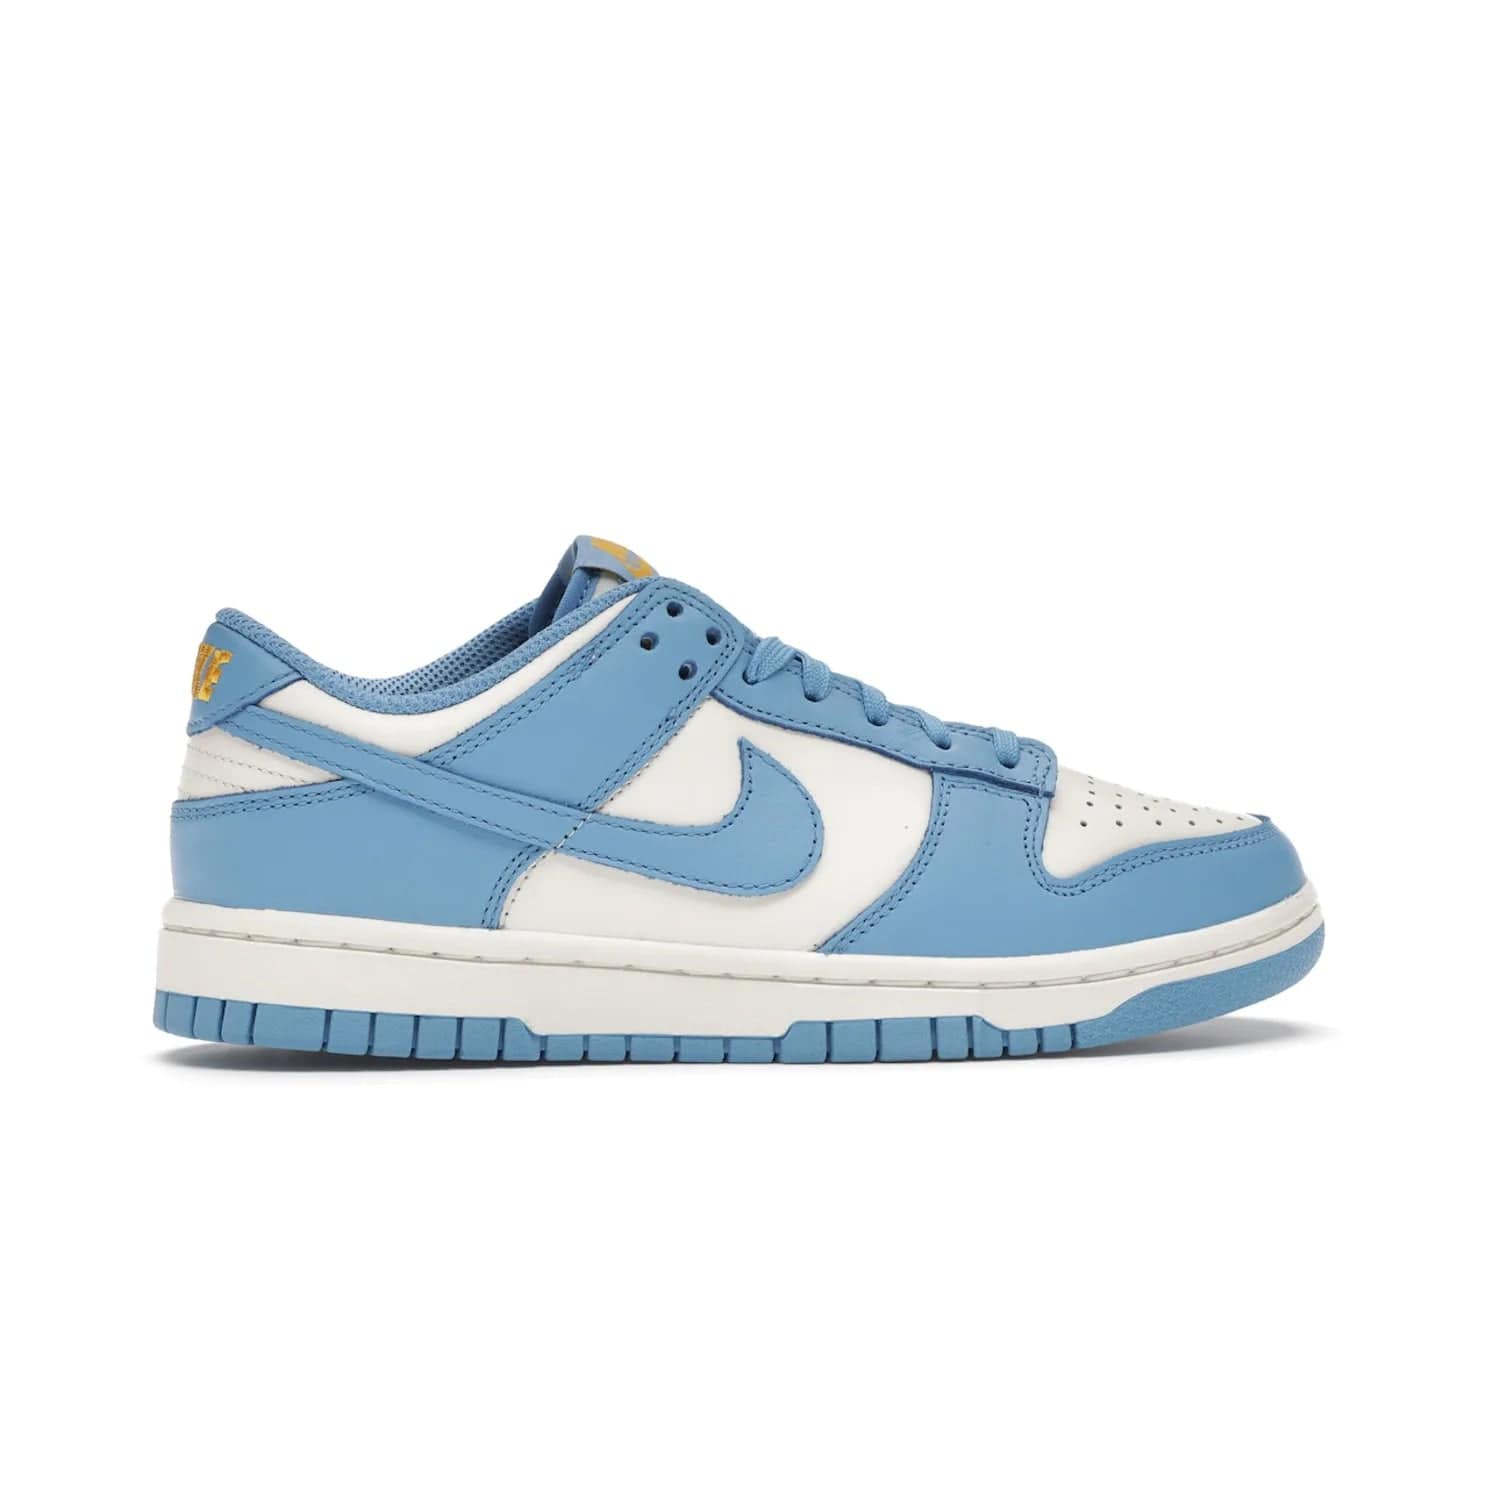 Nike Dunk Low Coast (Women's) - Image 36 - Only at www.BallersClubKickz.com - Iconic UCLA colors honor the west coast with the Nike Dunk Low Coast (Women's), a bold combo of light blue, white and yellow. Light leather upper with white midsole and light EVA outsole offer a modern twist. Released Feb 2021 for $100.